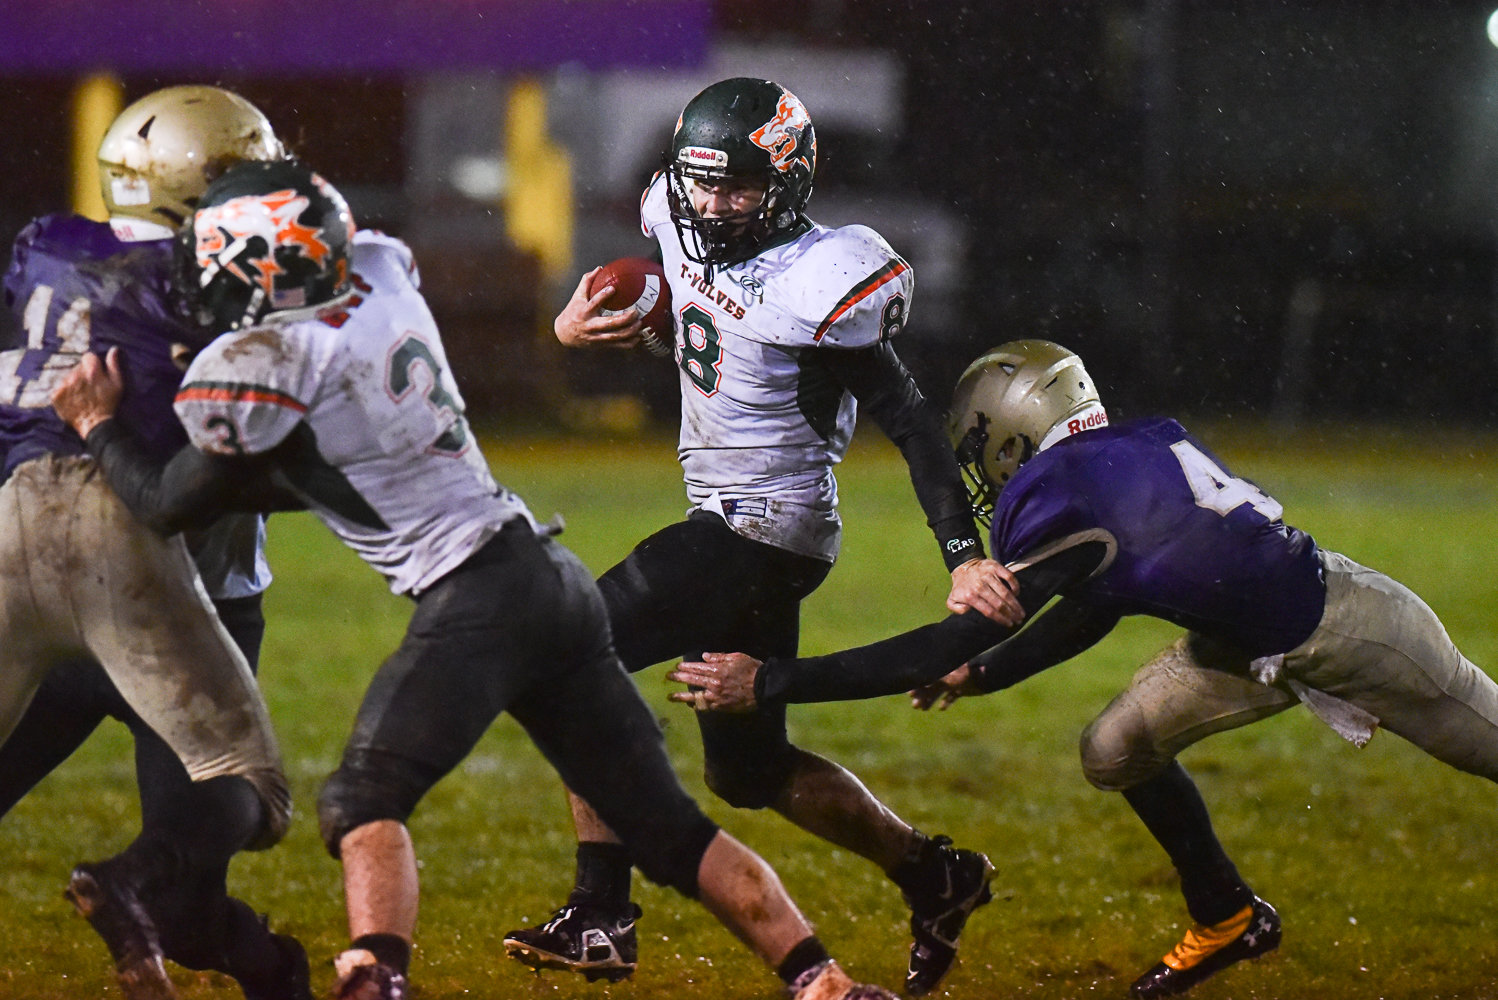 MWP tailback Carter Dantinne tries to evade a tackle in the backfield during the first half of the T-Wolves' loss to Onalaska on Nov. 4.